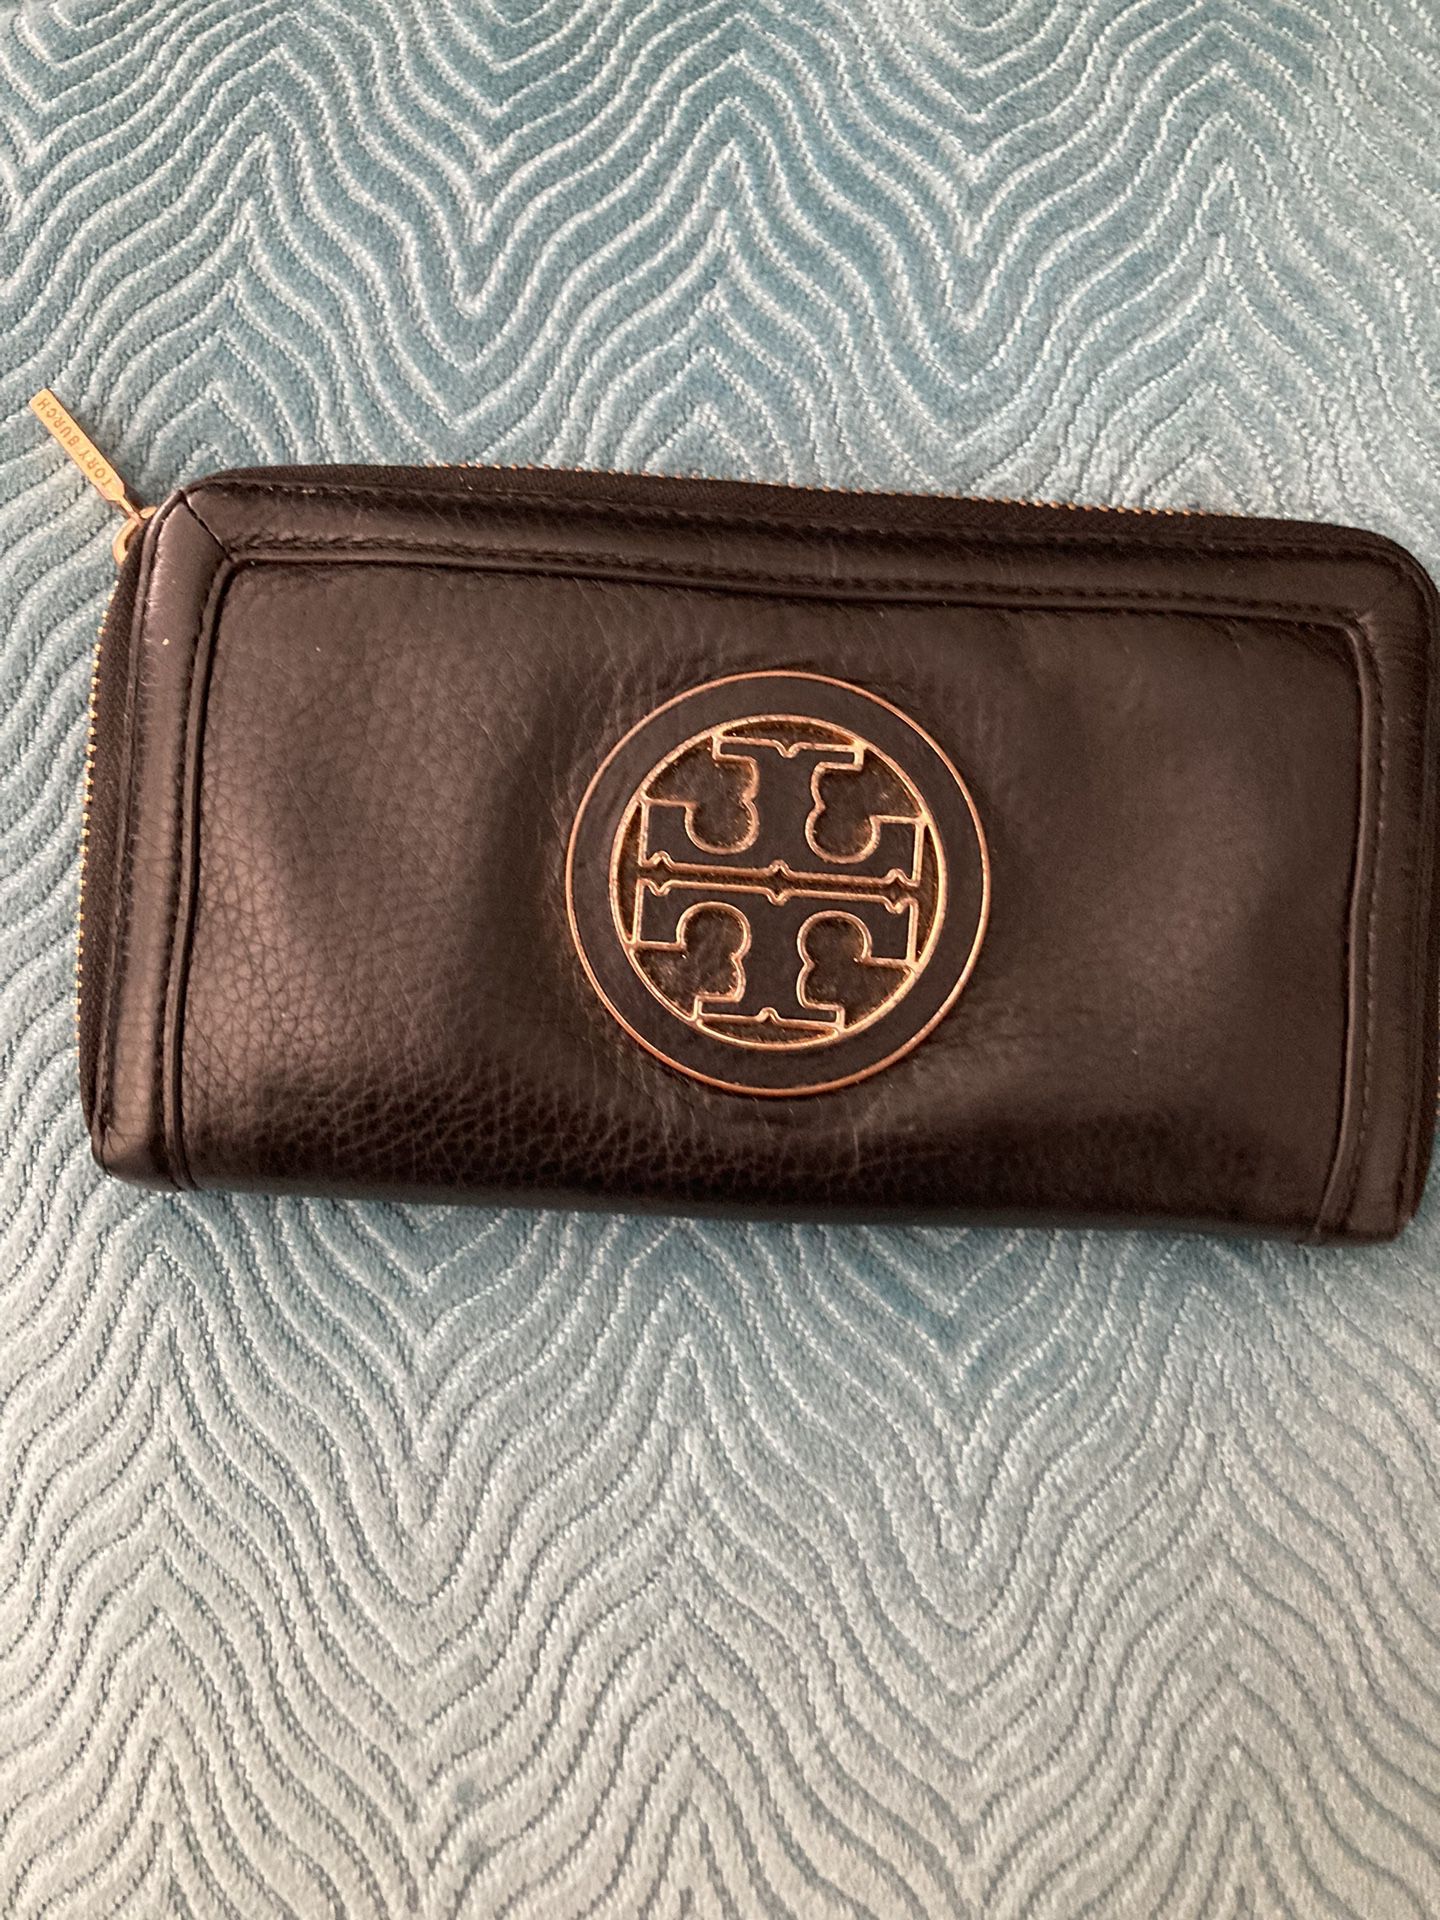 Tory Burch Black Wallet for Sale in Huntington Beach, CA - OfferUp